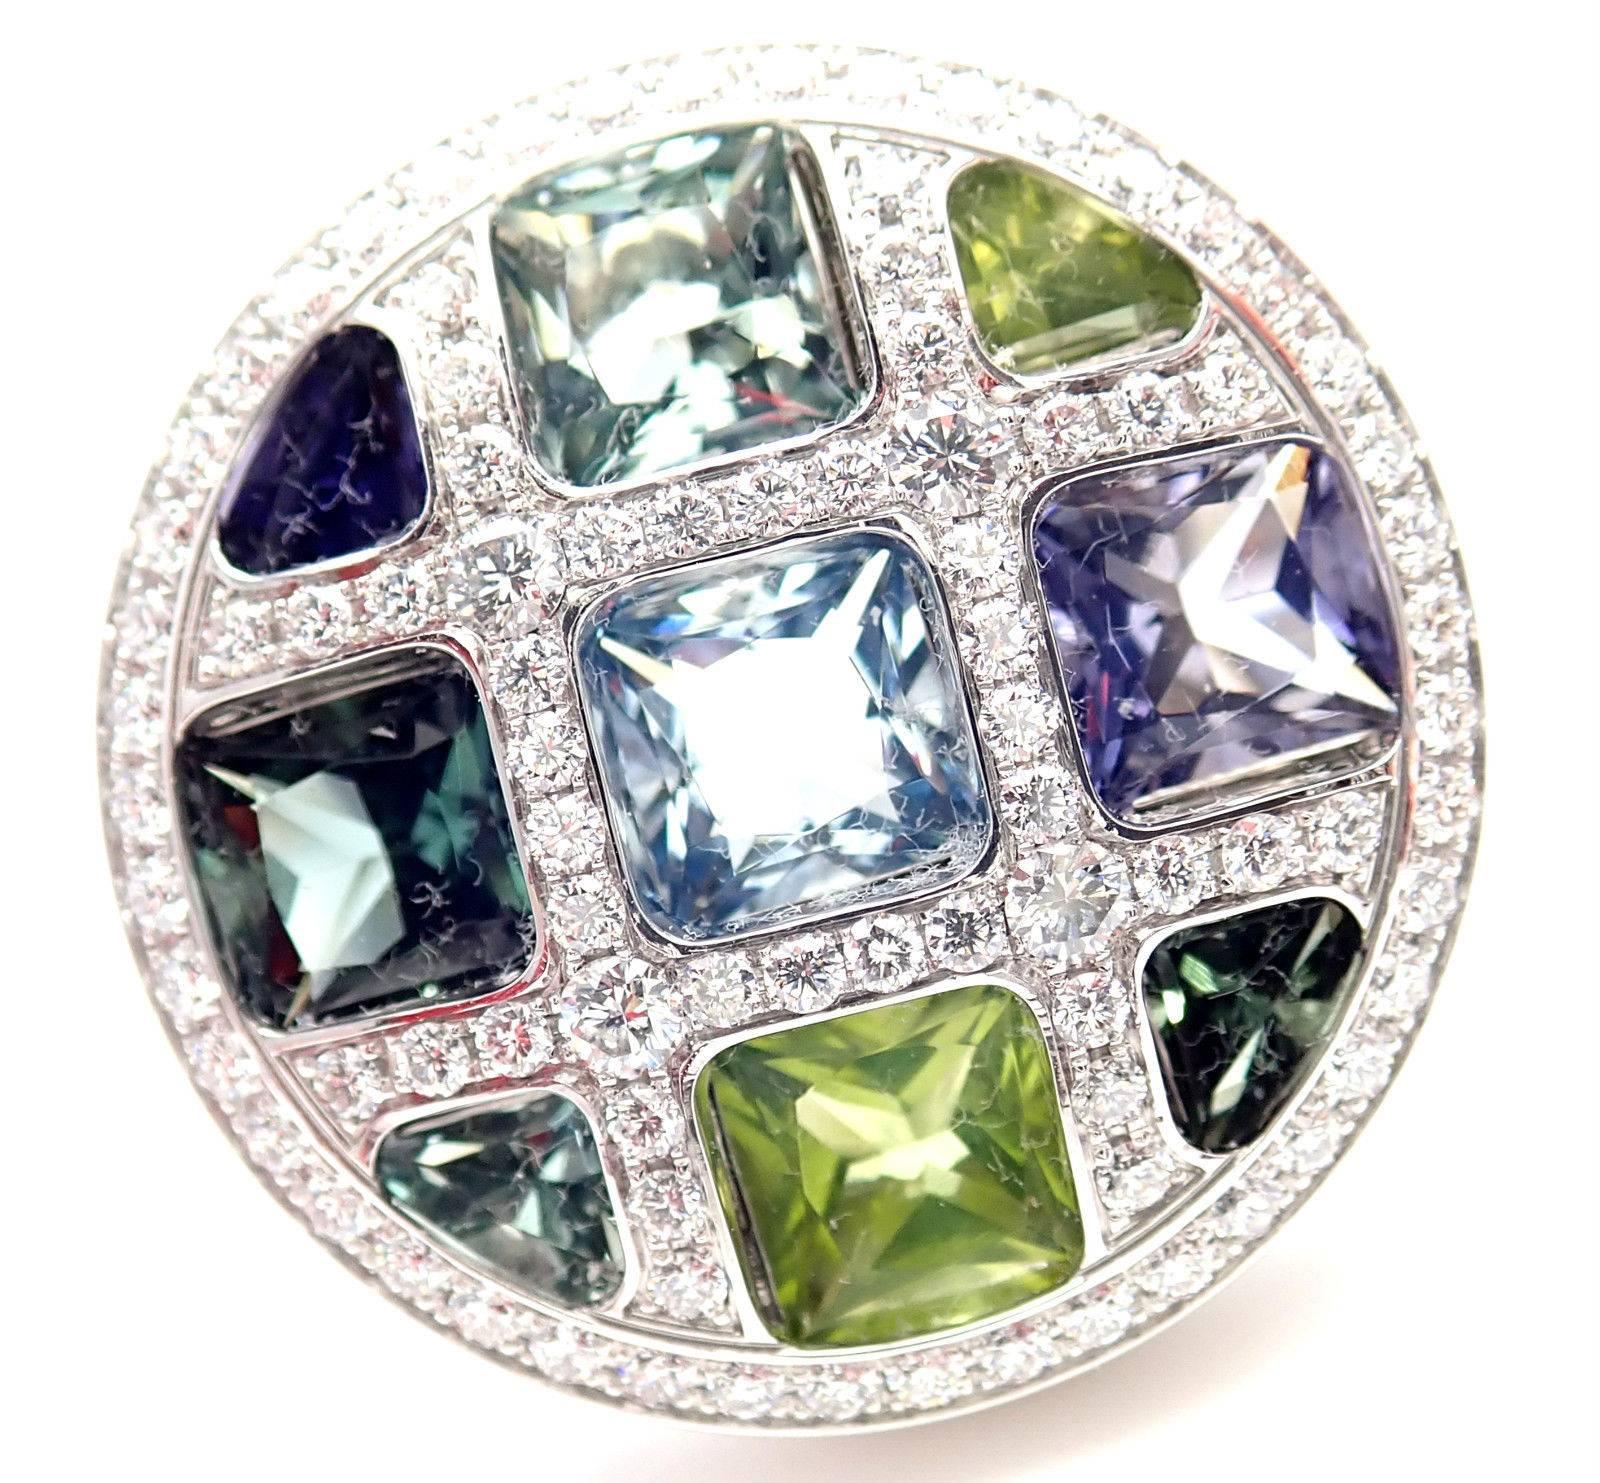 18k White Gold Diamond And Color Stone Large Pasha Ring by Cartier. 
With 89 Round brilliant cut diamonds VVS1 clarity, E color total weight approx.1.50ct
Peridot, Amethyst, Aquamarine, Green Tourmaline, Violet Cordierite
This ring is in mint